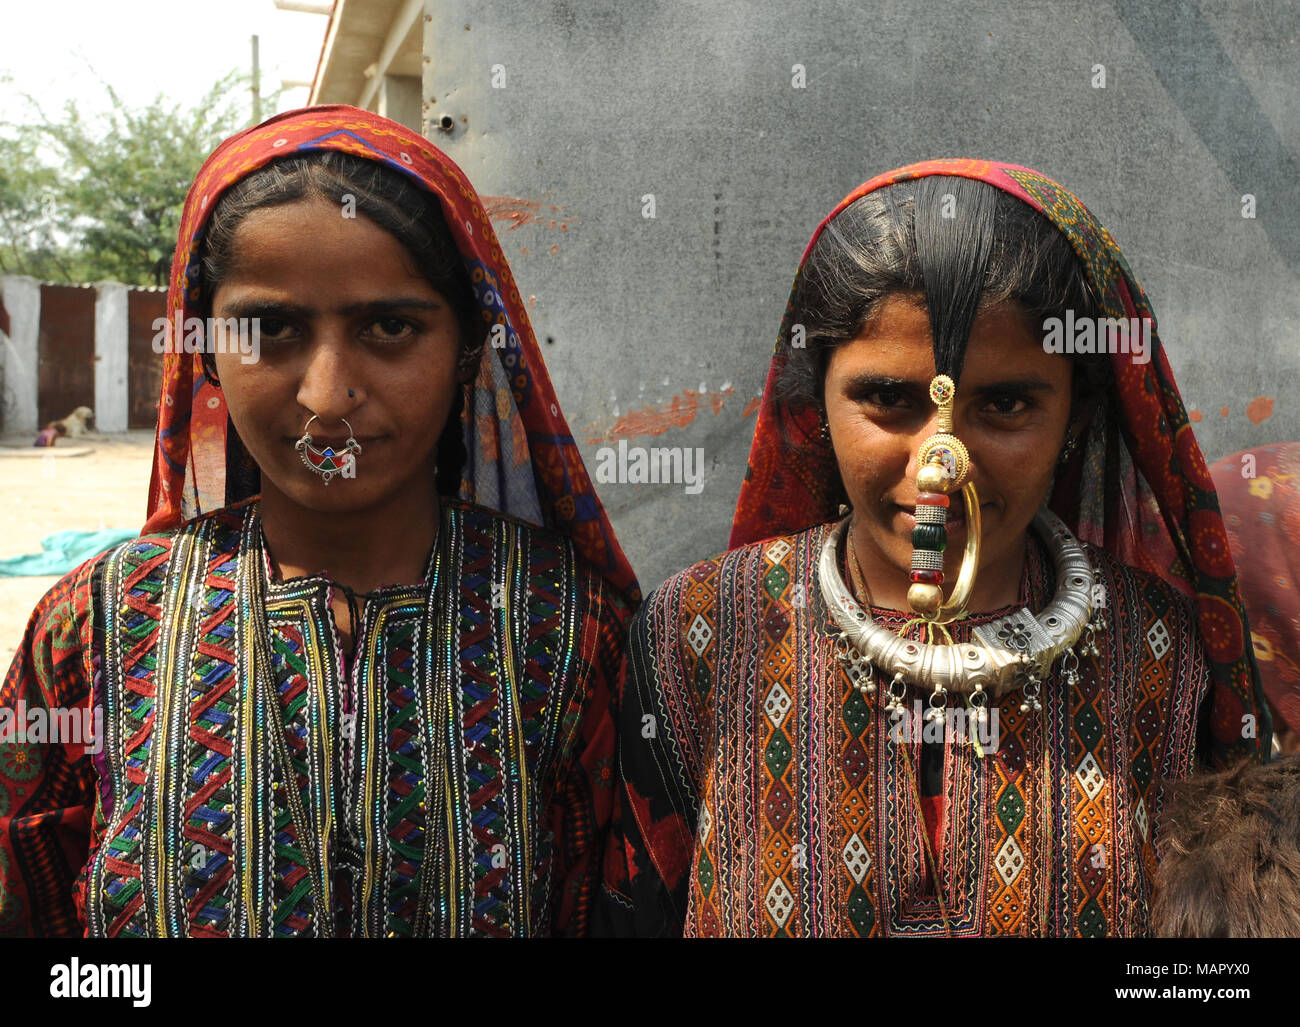 Two young Jat women, one wearing traditional brass Jat tribal nose ring, jewellery and clothing, Bhidara village, Kutch, Gujarat, India, Asia Stock Photo